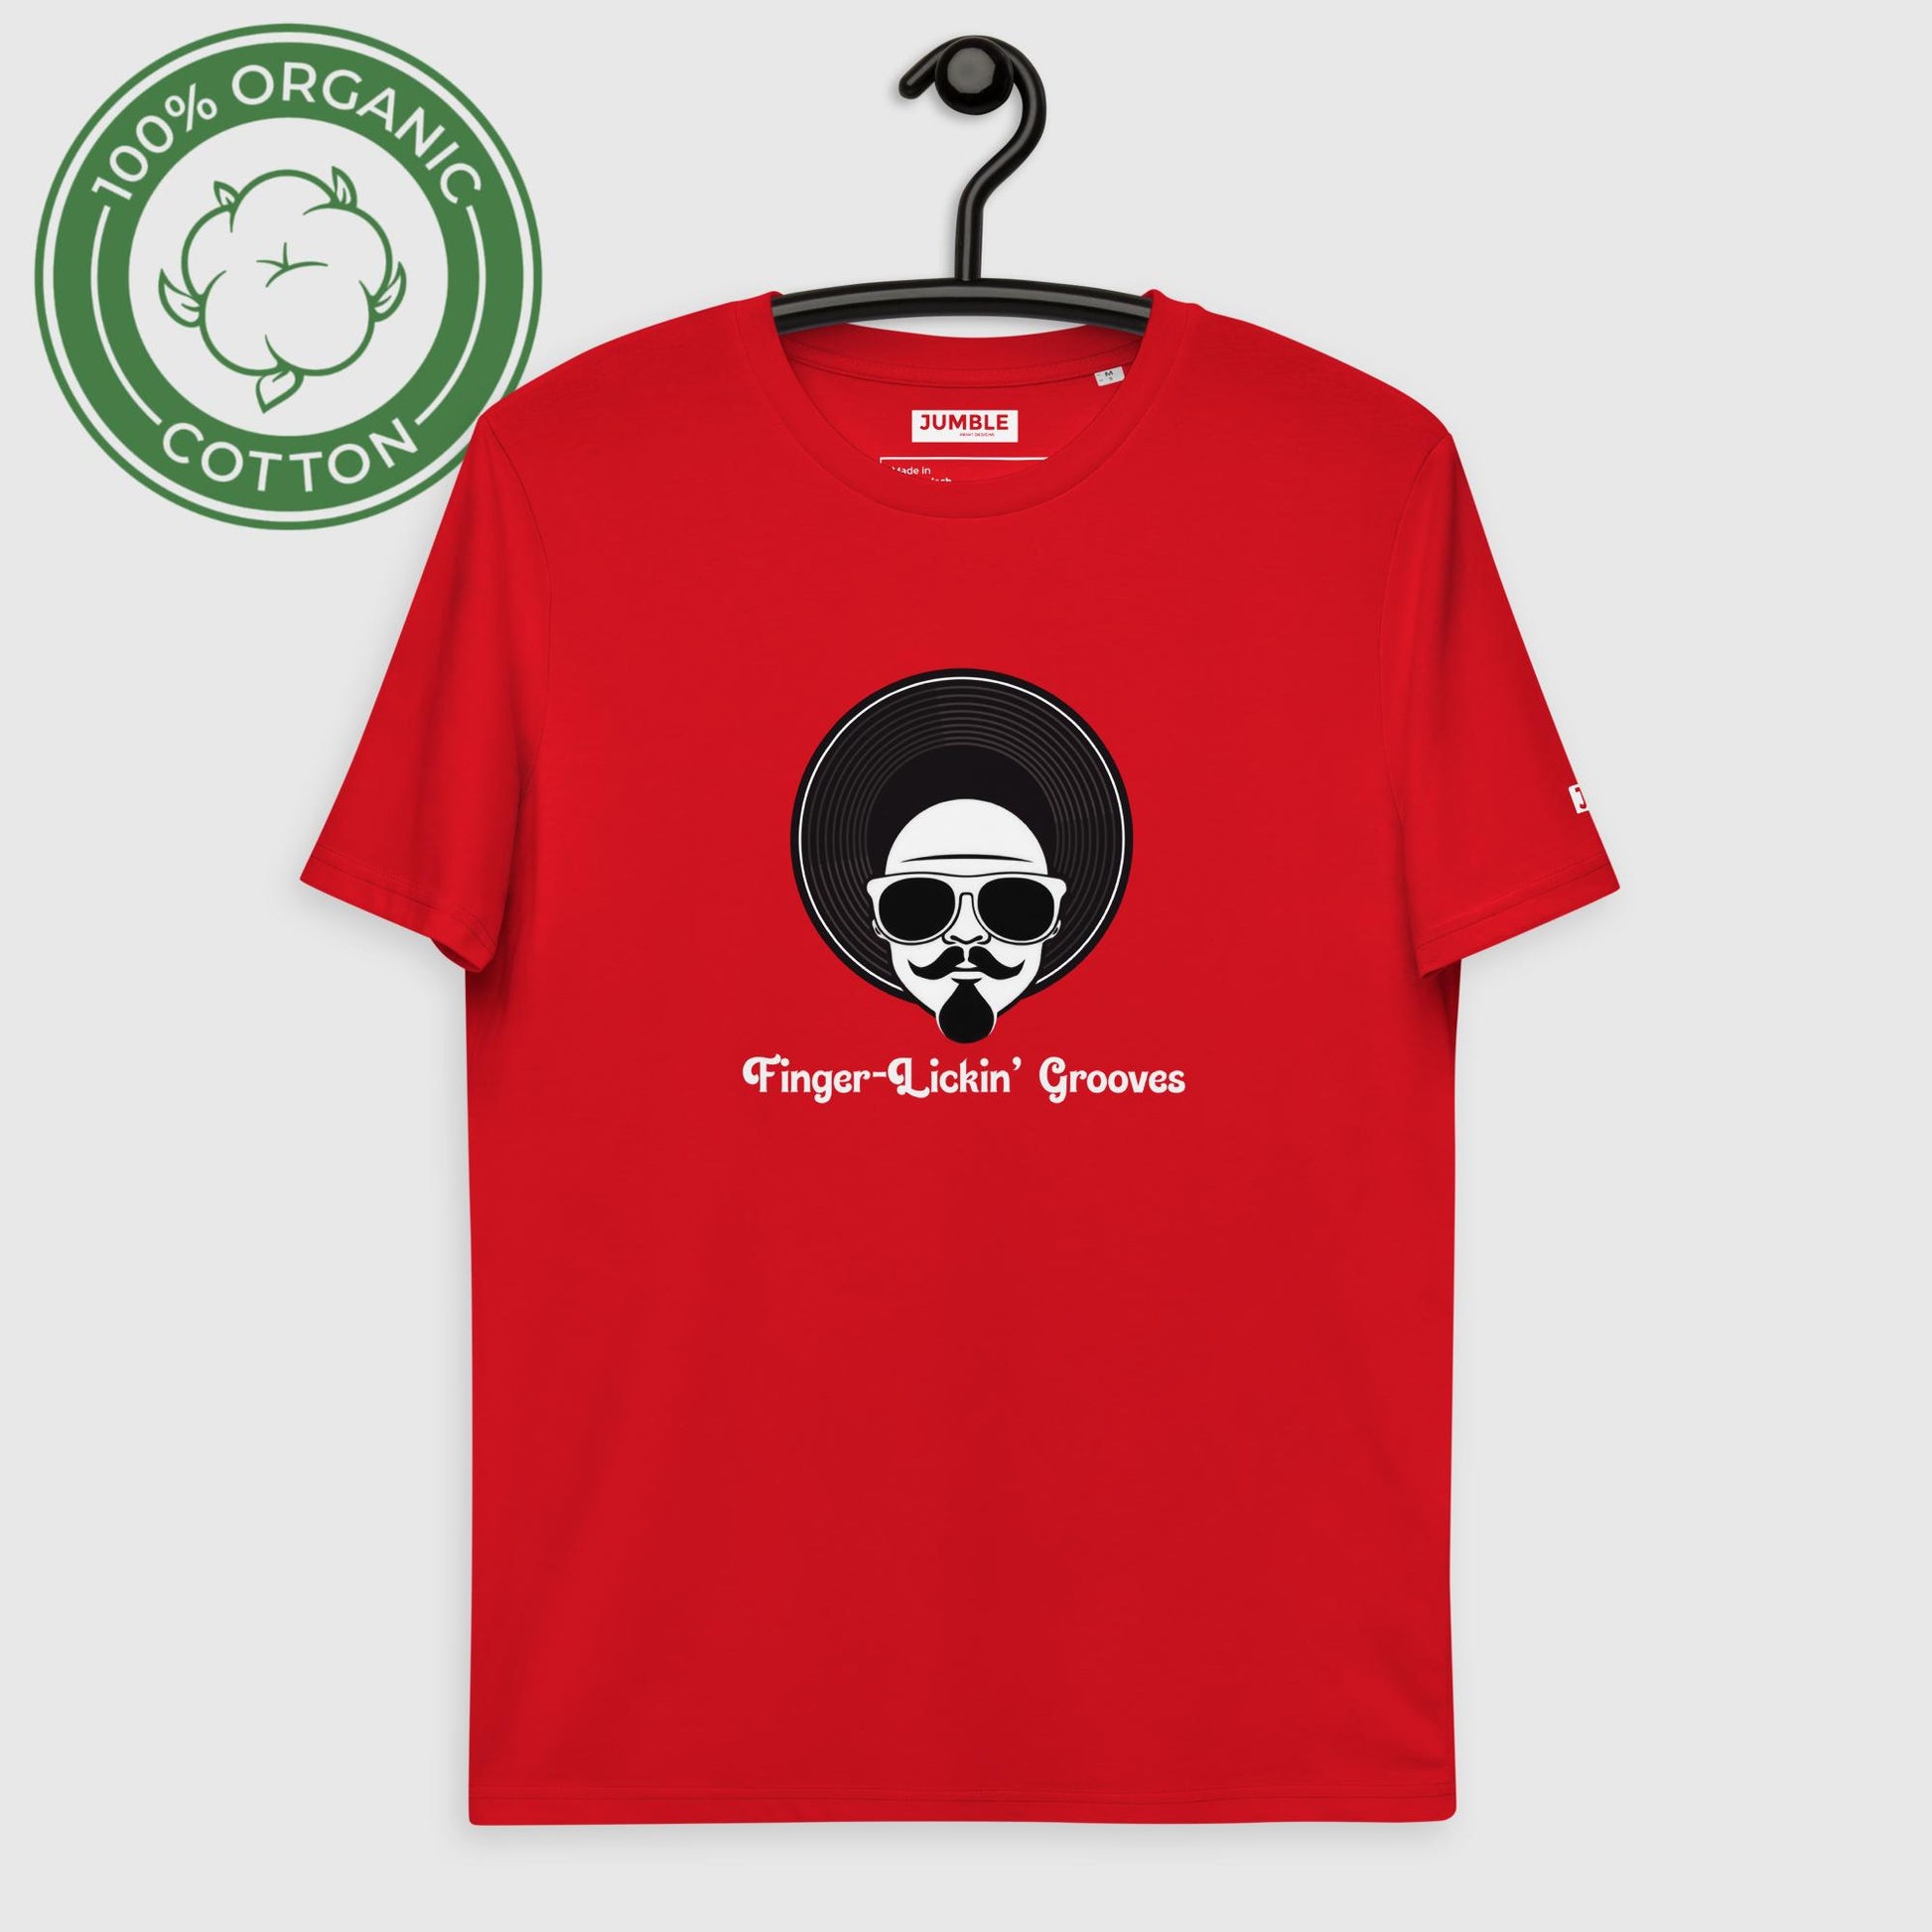 Colonel Funk's Unisex Organic Cotton T-shirt in Red, showcased on a hanger